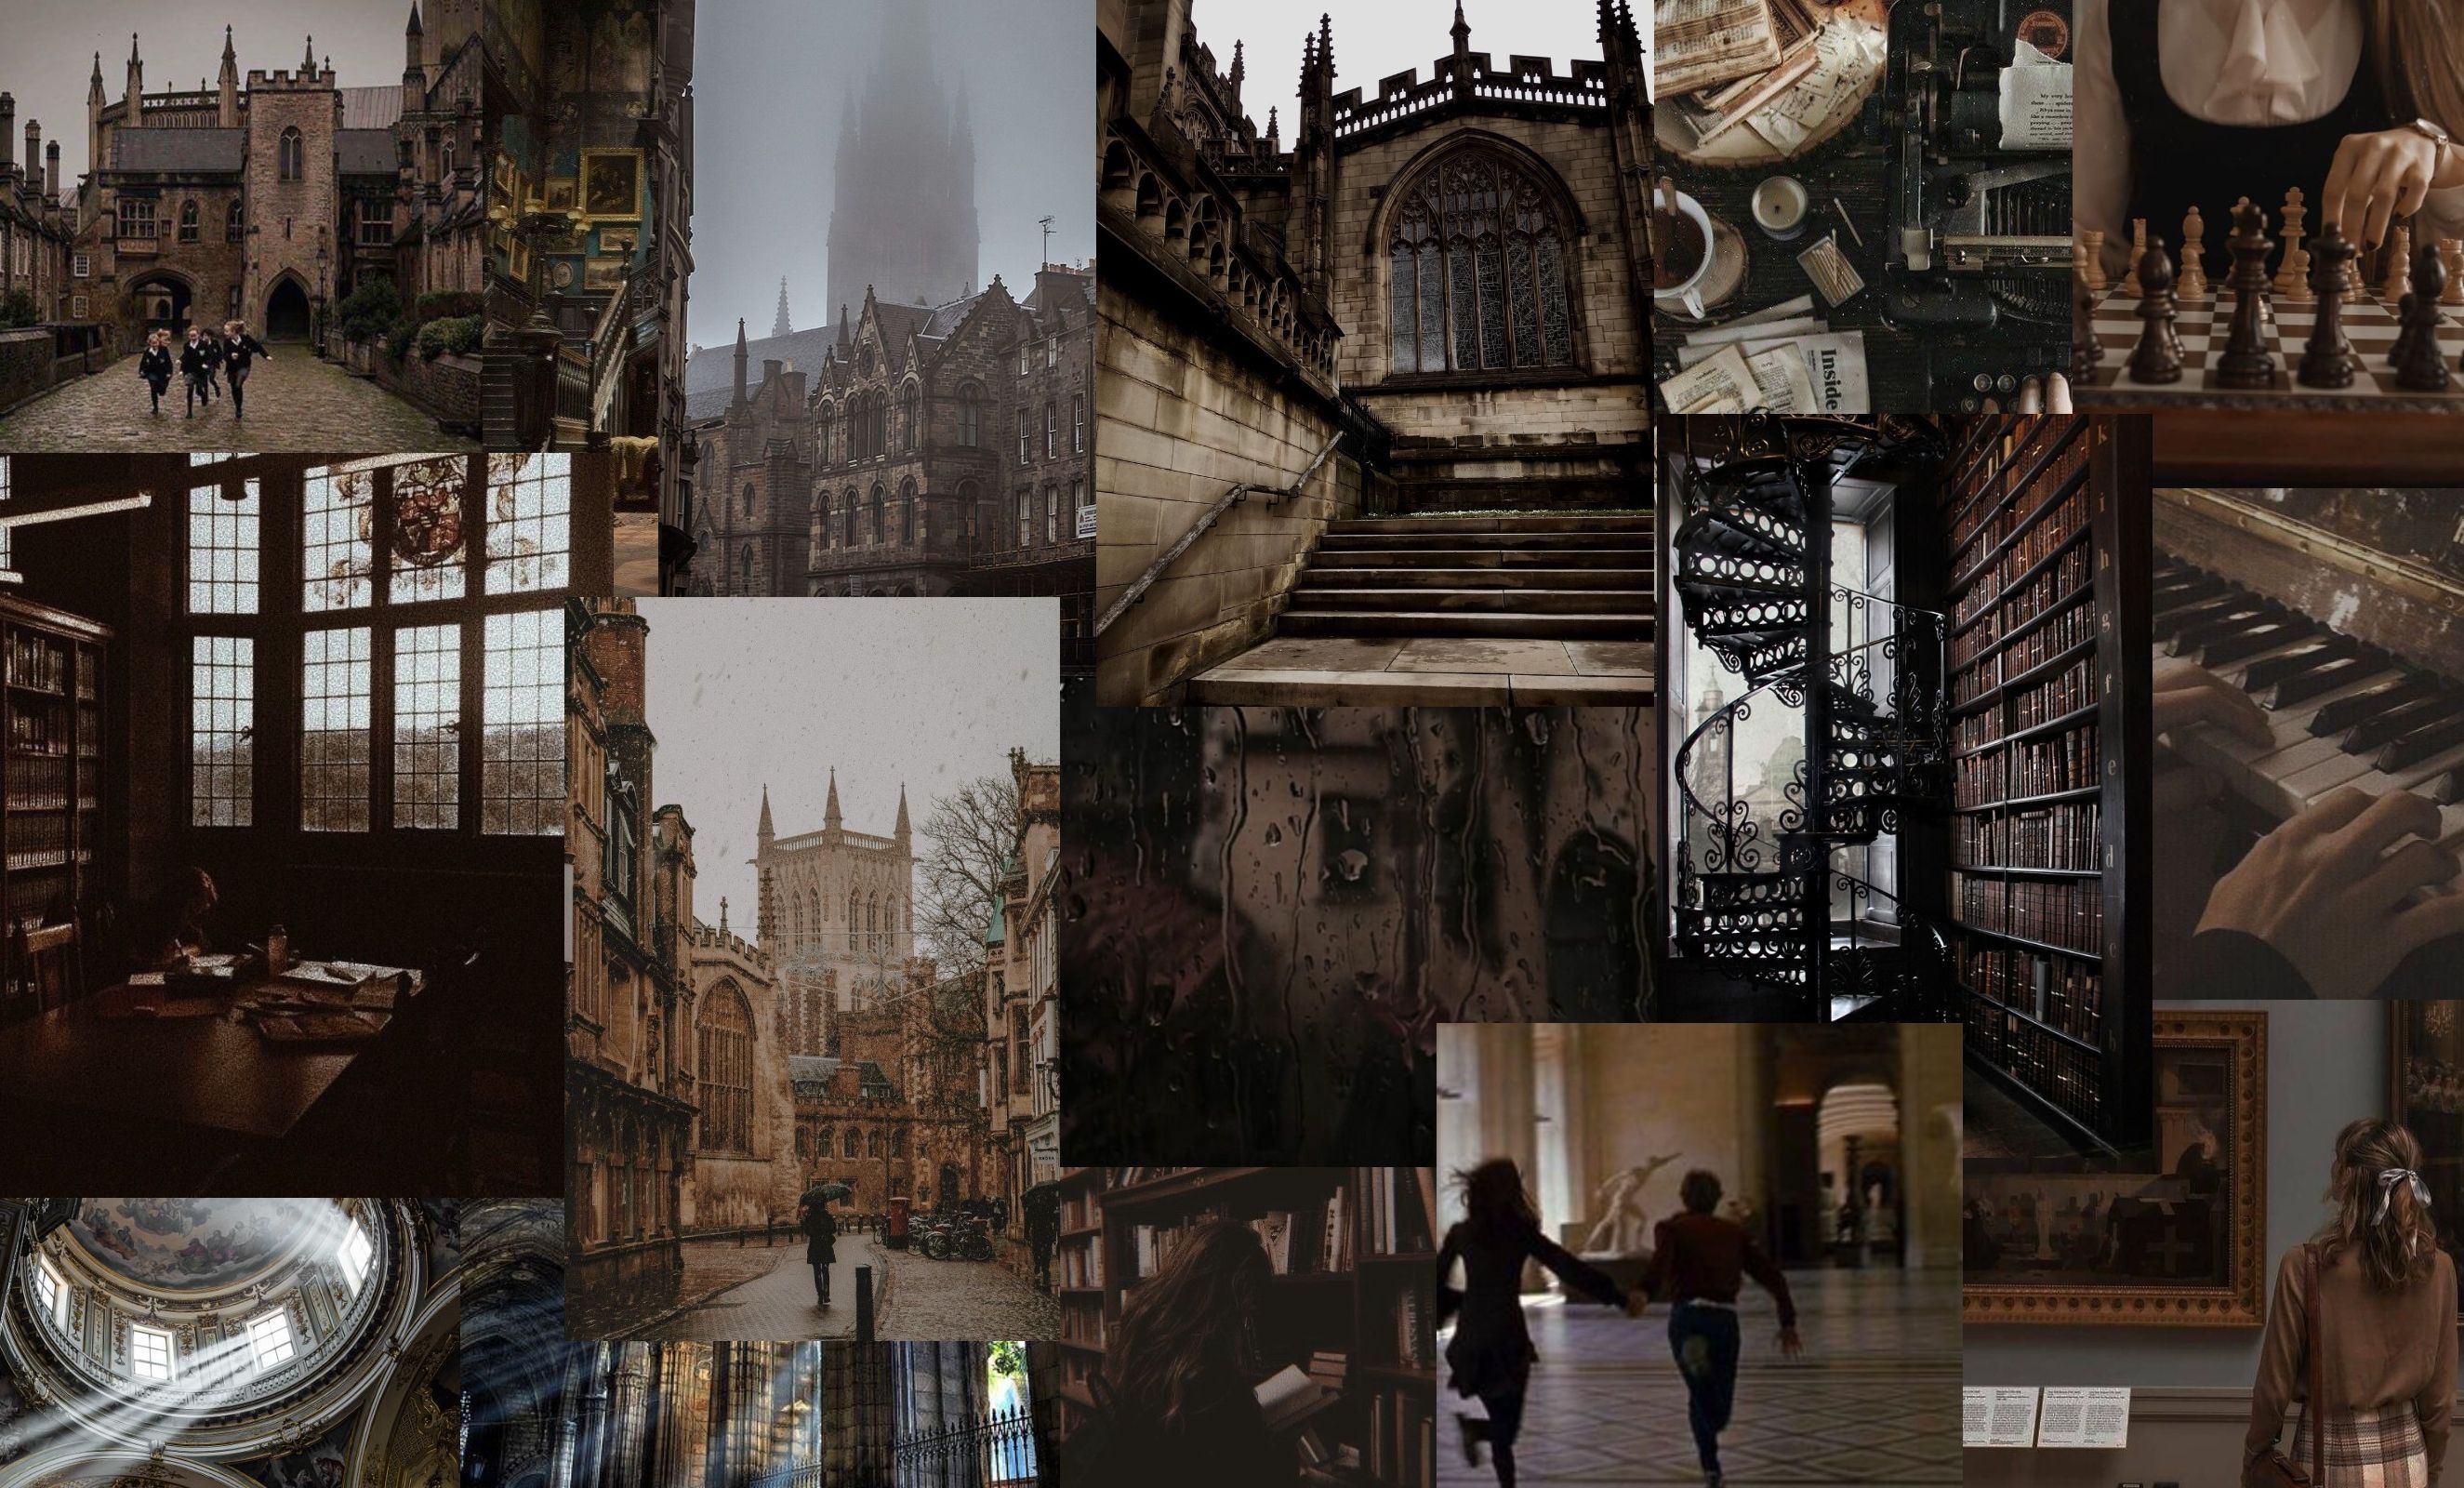 A collage of images of Oxford University, including a cathedral, a library, and a staircase. - Dark academia, architecture